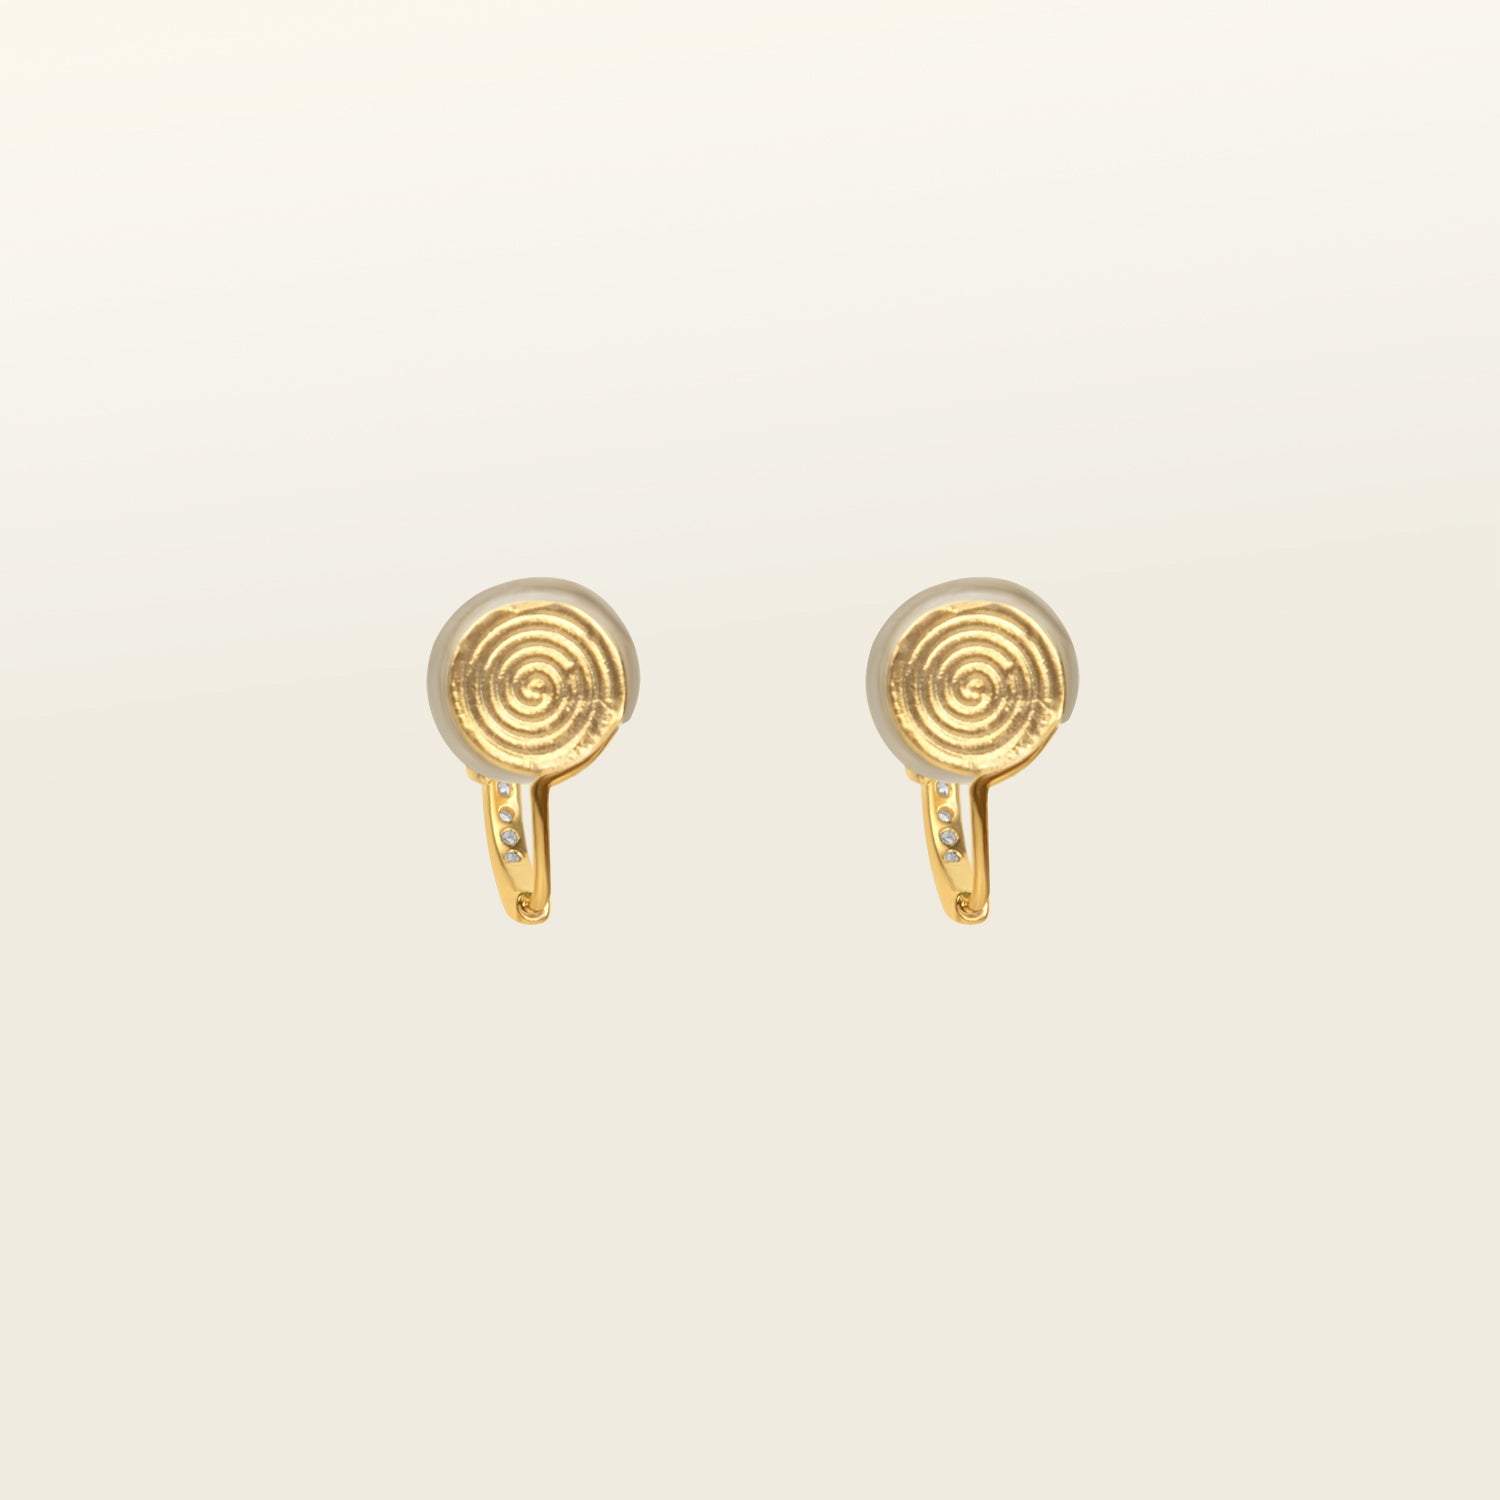 Catalogue Image of the Mini Pavé Huggie Clip-On Earrings - 14k gold-plated alloy with cubic zirconia, non-tarnish, water-resistant, and discreet mosquito coil closure for a regal touch.